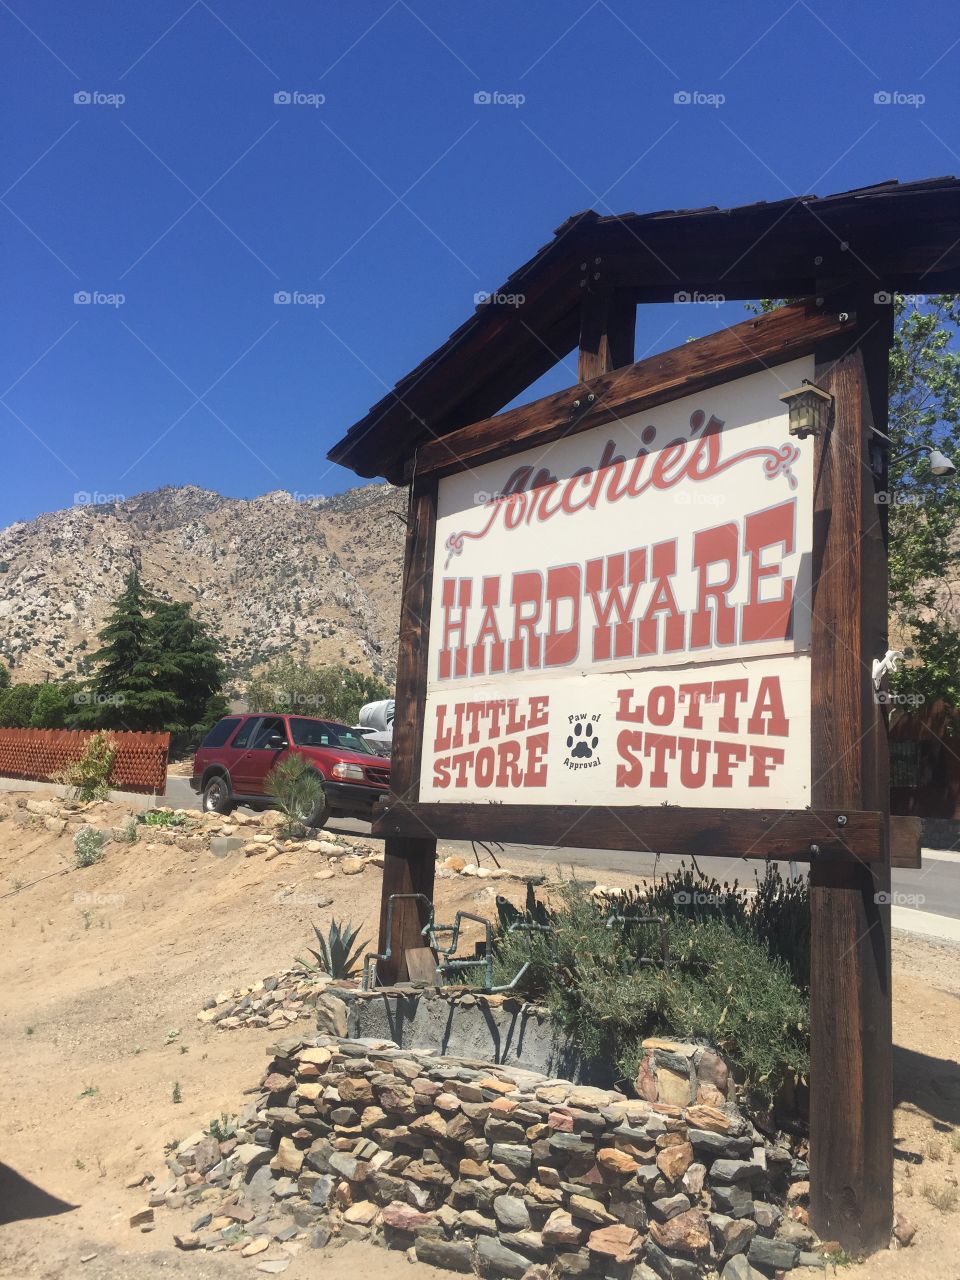 Archie's Hardware store in Kernville, CA